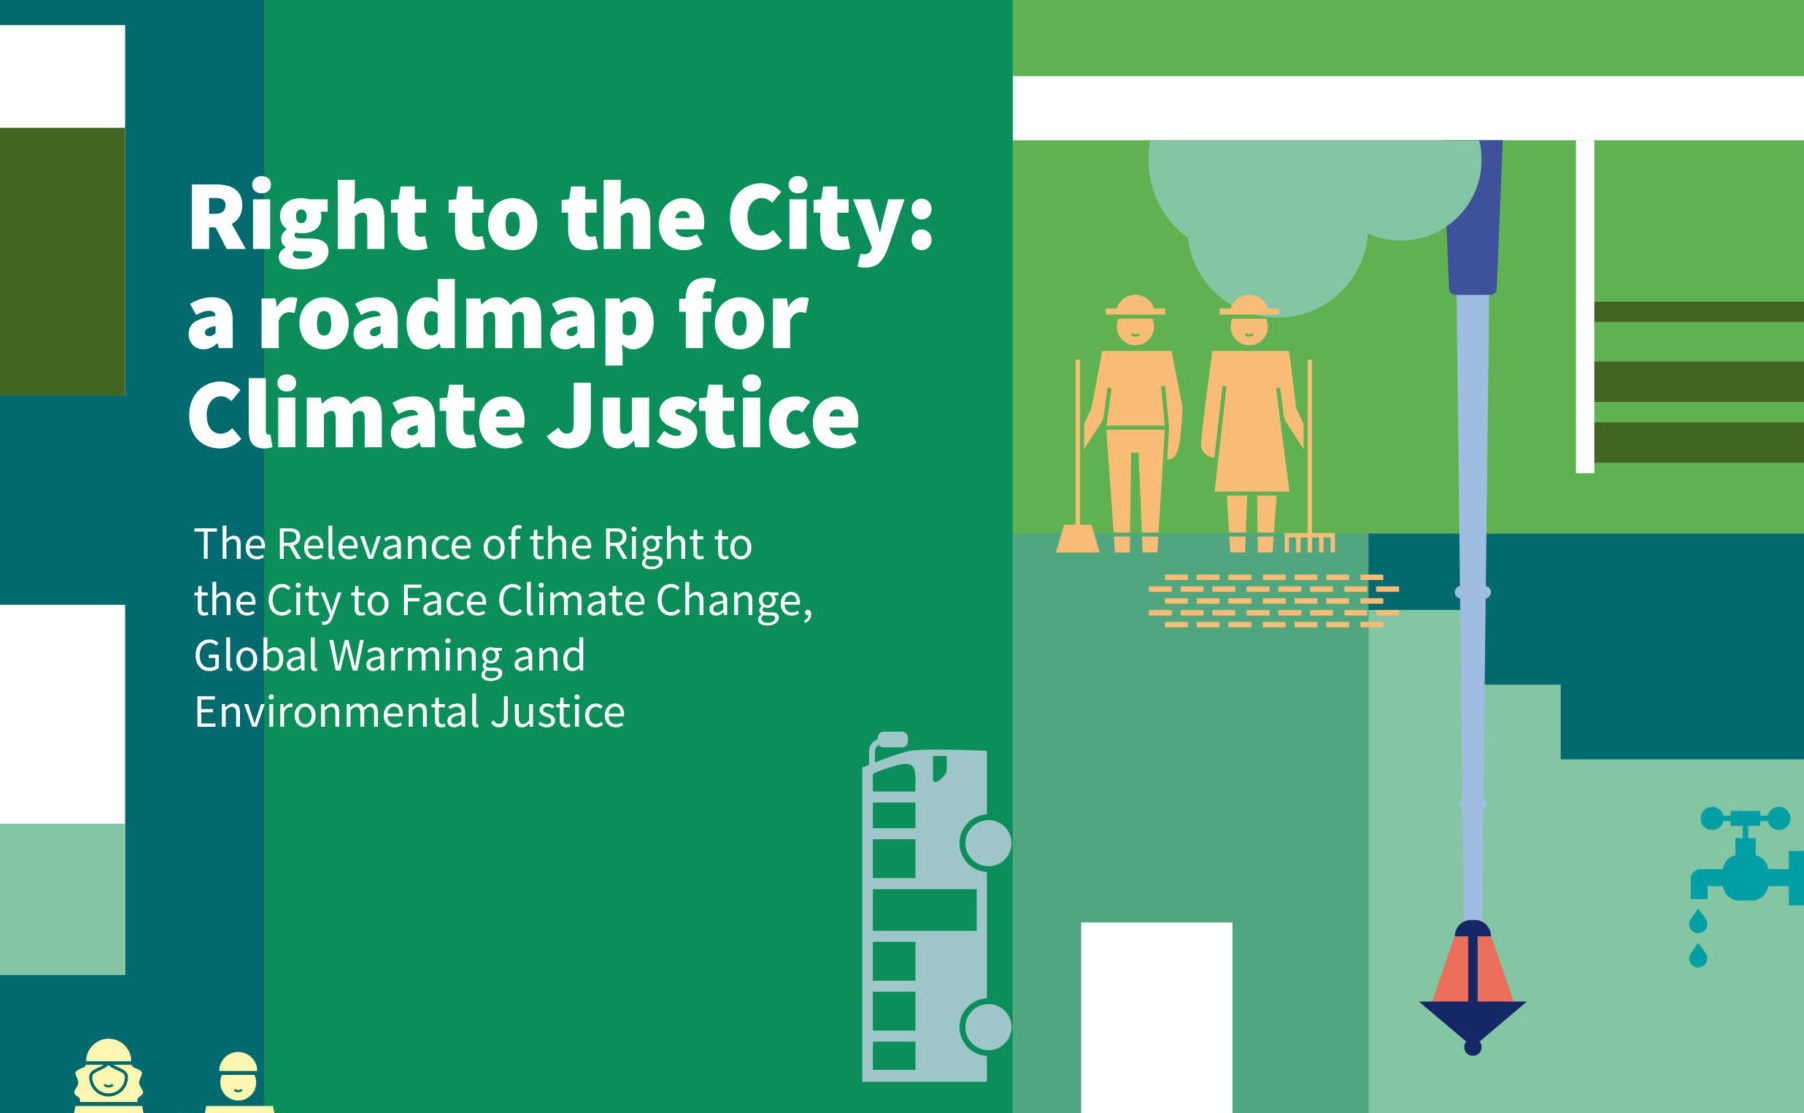 https://www.right2city.org/wp-content/uploads/2021/06/Right-to-the-City-Climate-Change_V5-1-scaled-e1633602623940.jpg